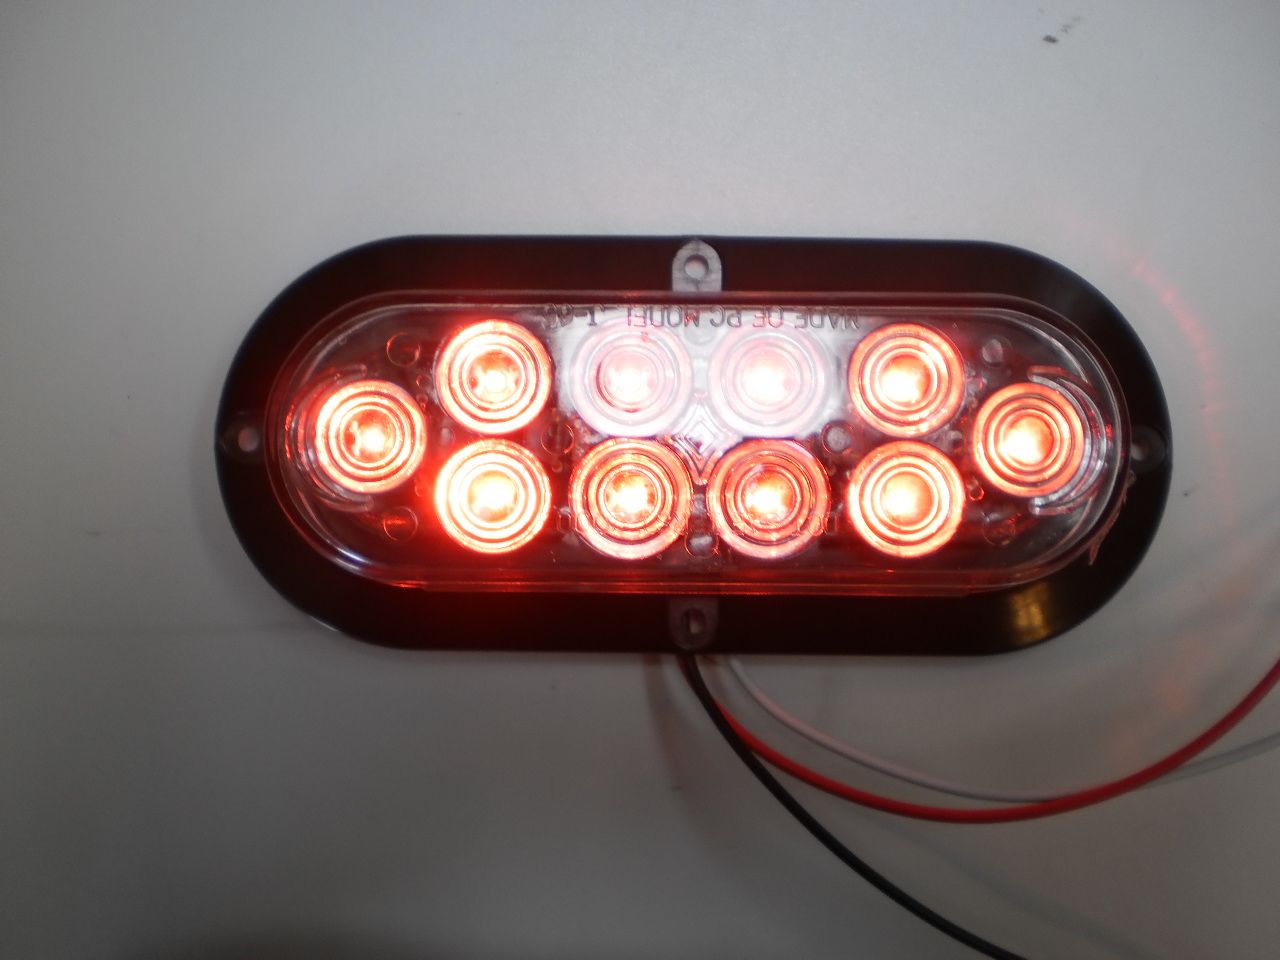 TWO) 6” Oval Flange Surface Mount 10 LED Clear Lens Red Truck